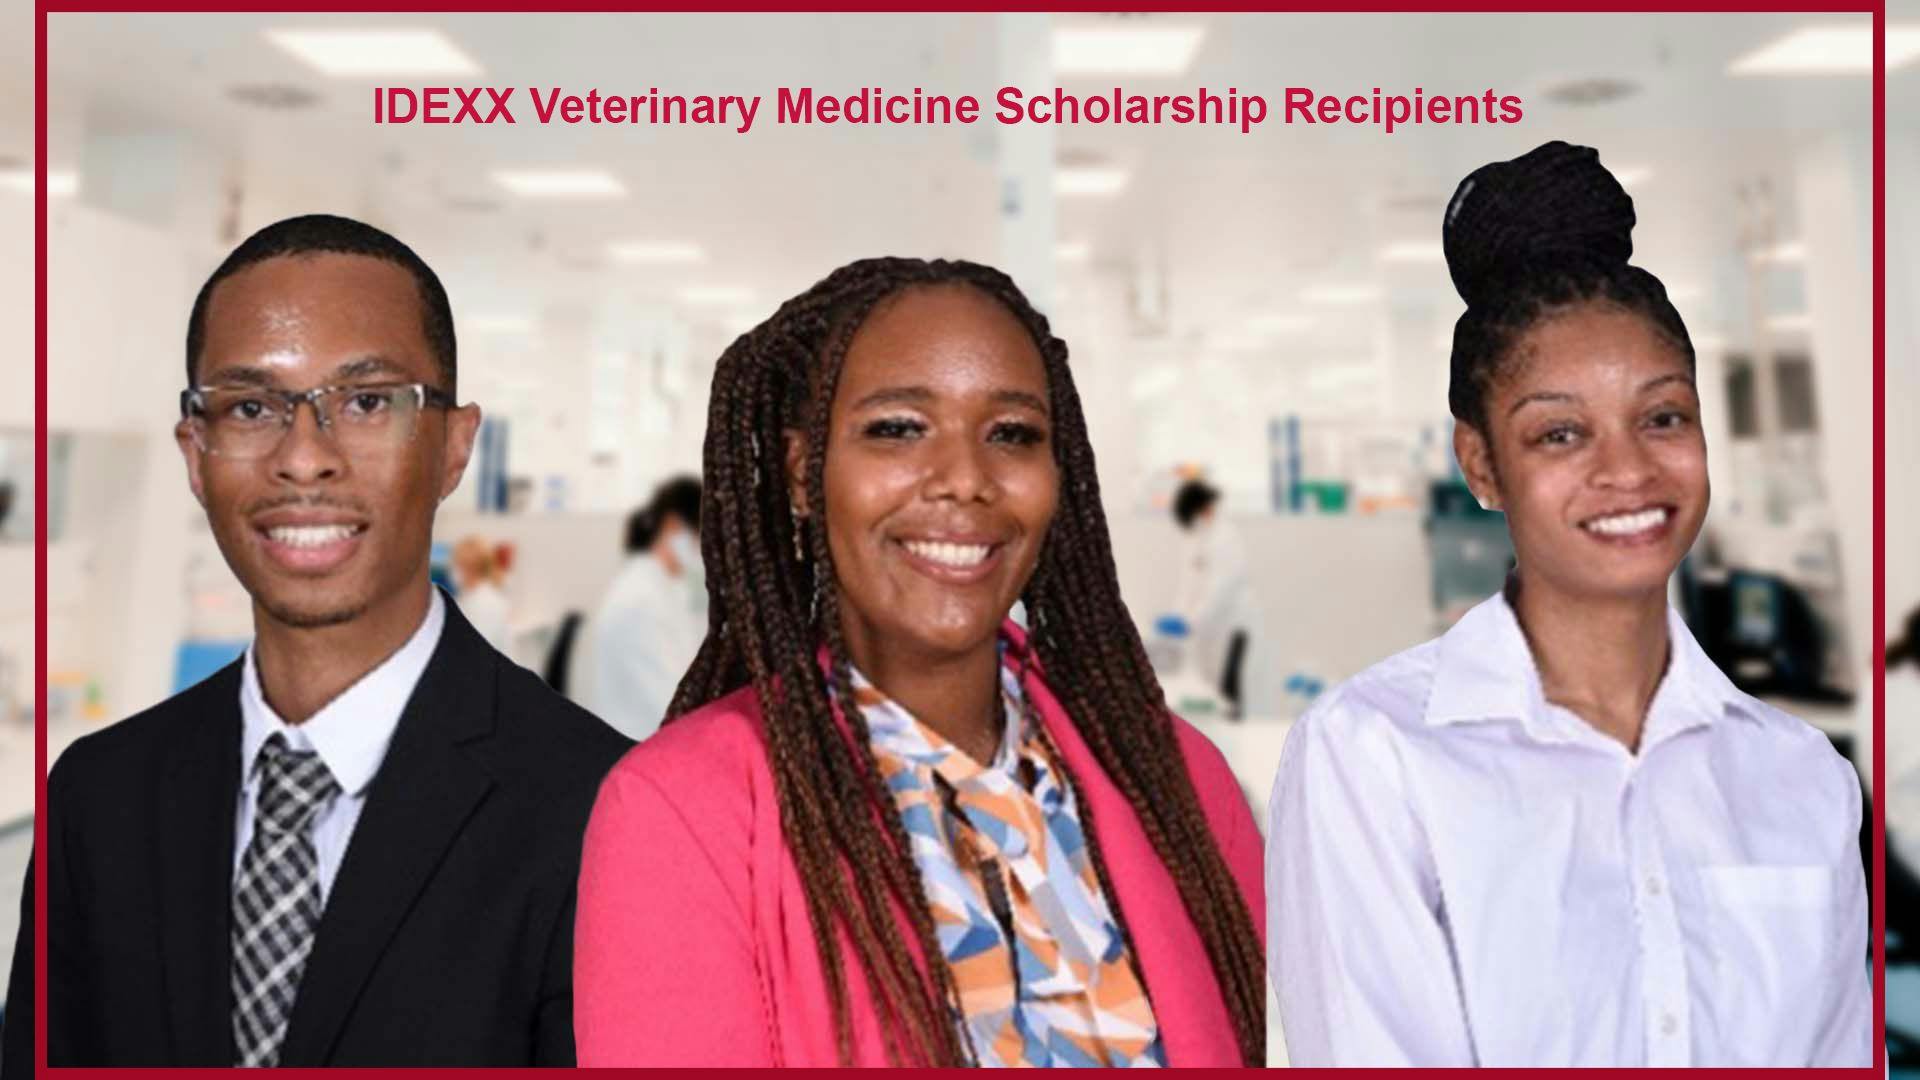 Image courtesy of IDEXX and Tuskegee University College of Veterinary Medicine